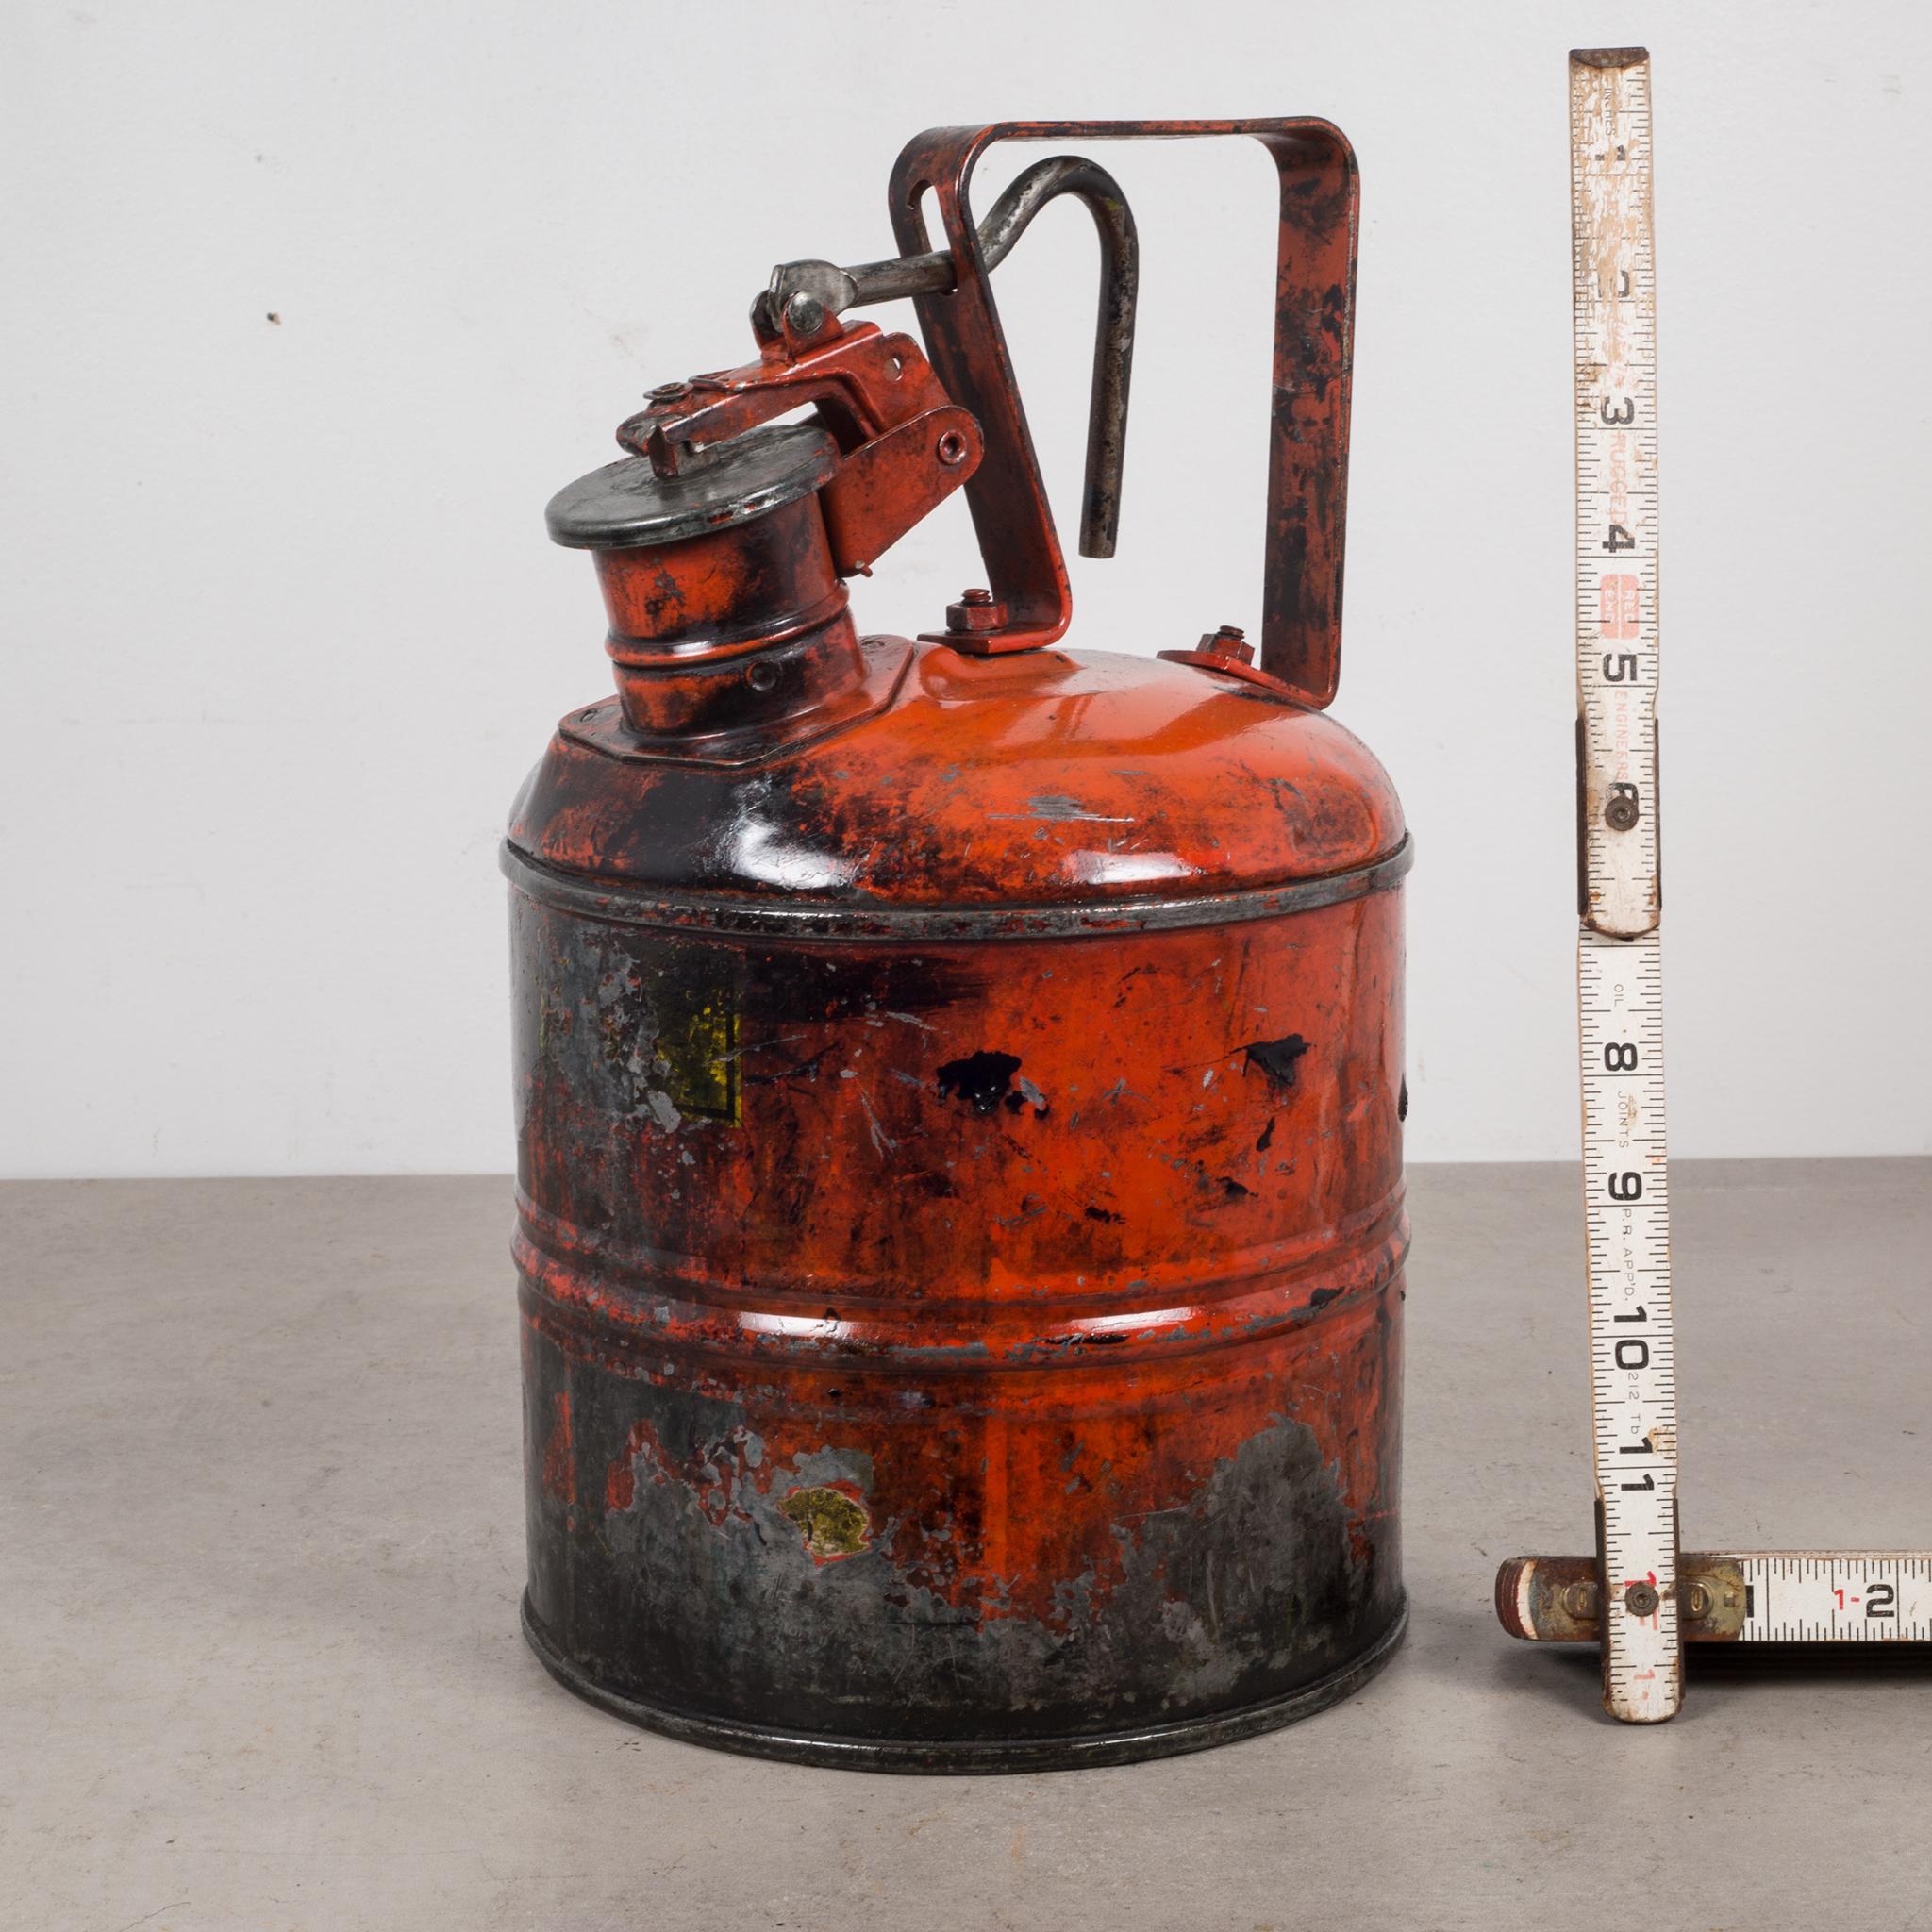 Industrial Vintage Safety Gas Can, circa 1940